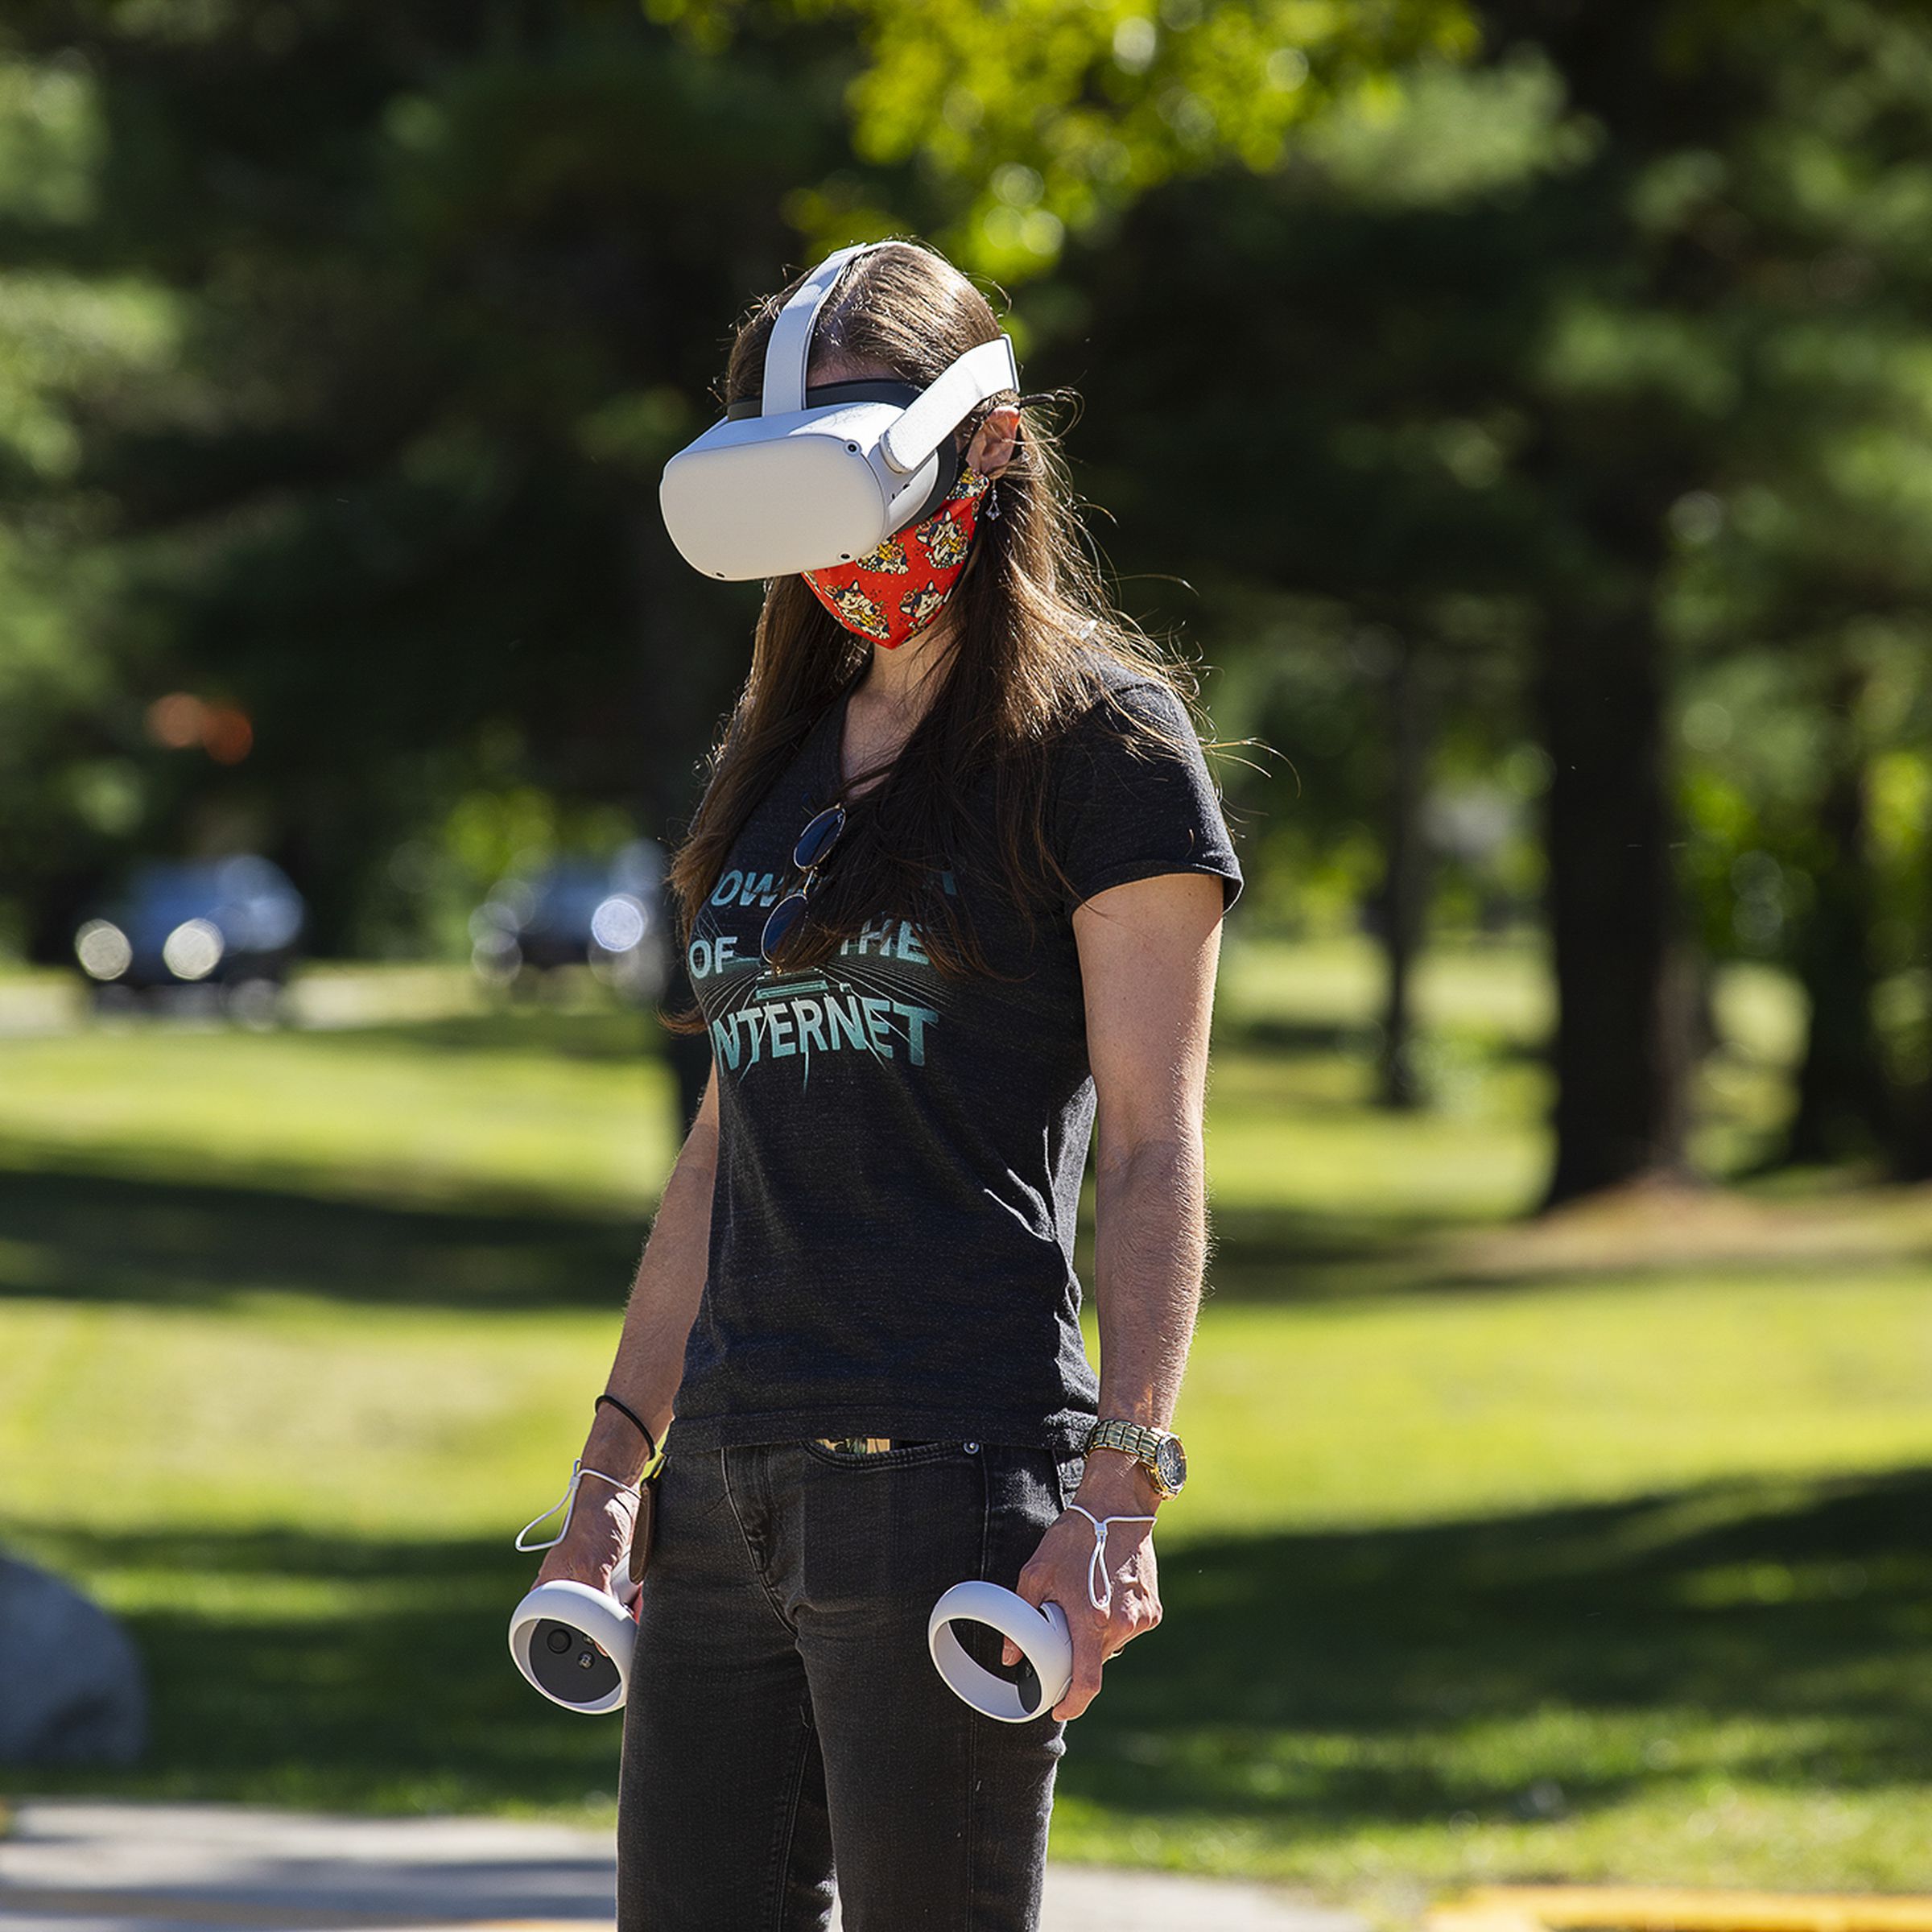 Photo of a person standing in a parking lot wearing a white virtual reality headset and holding two controllers in their hands.